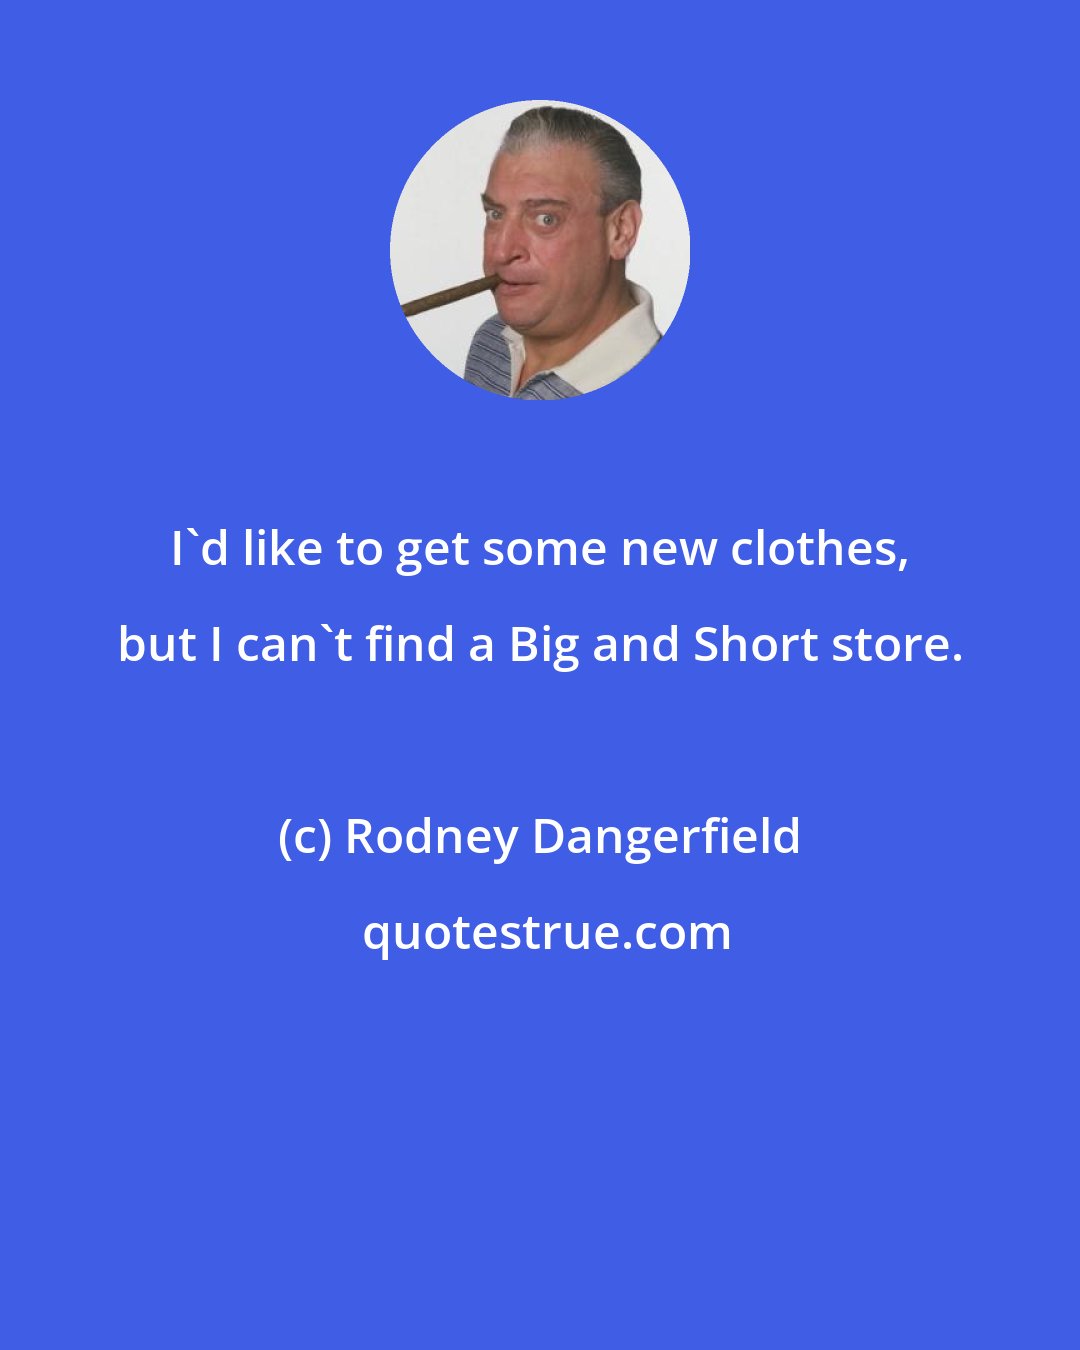 Rodney Dangerfield: I'd like to get some new clothes, but I can't find a Big and Short store.